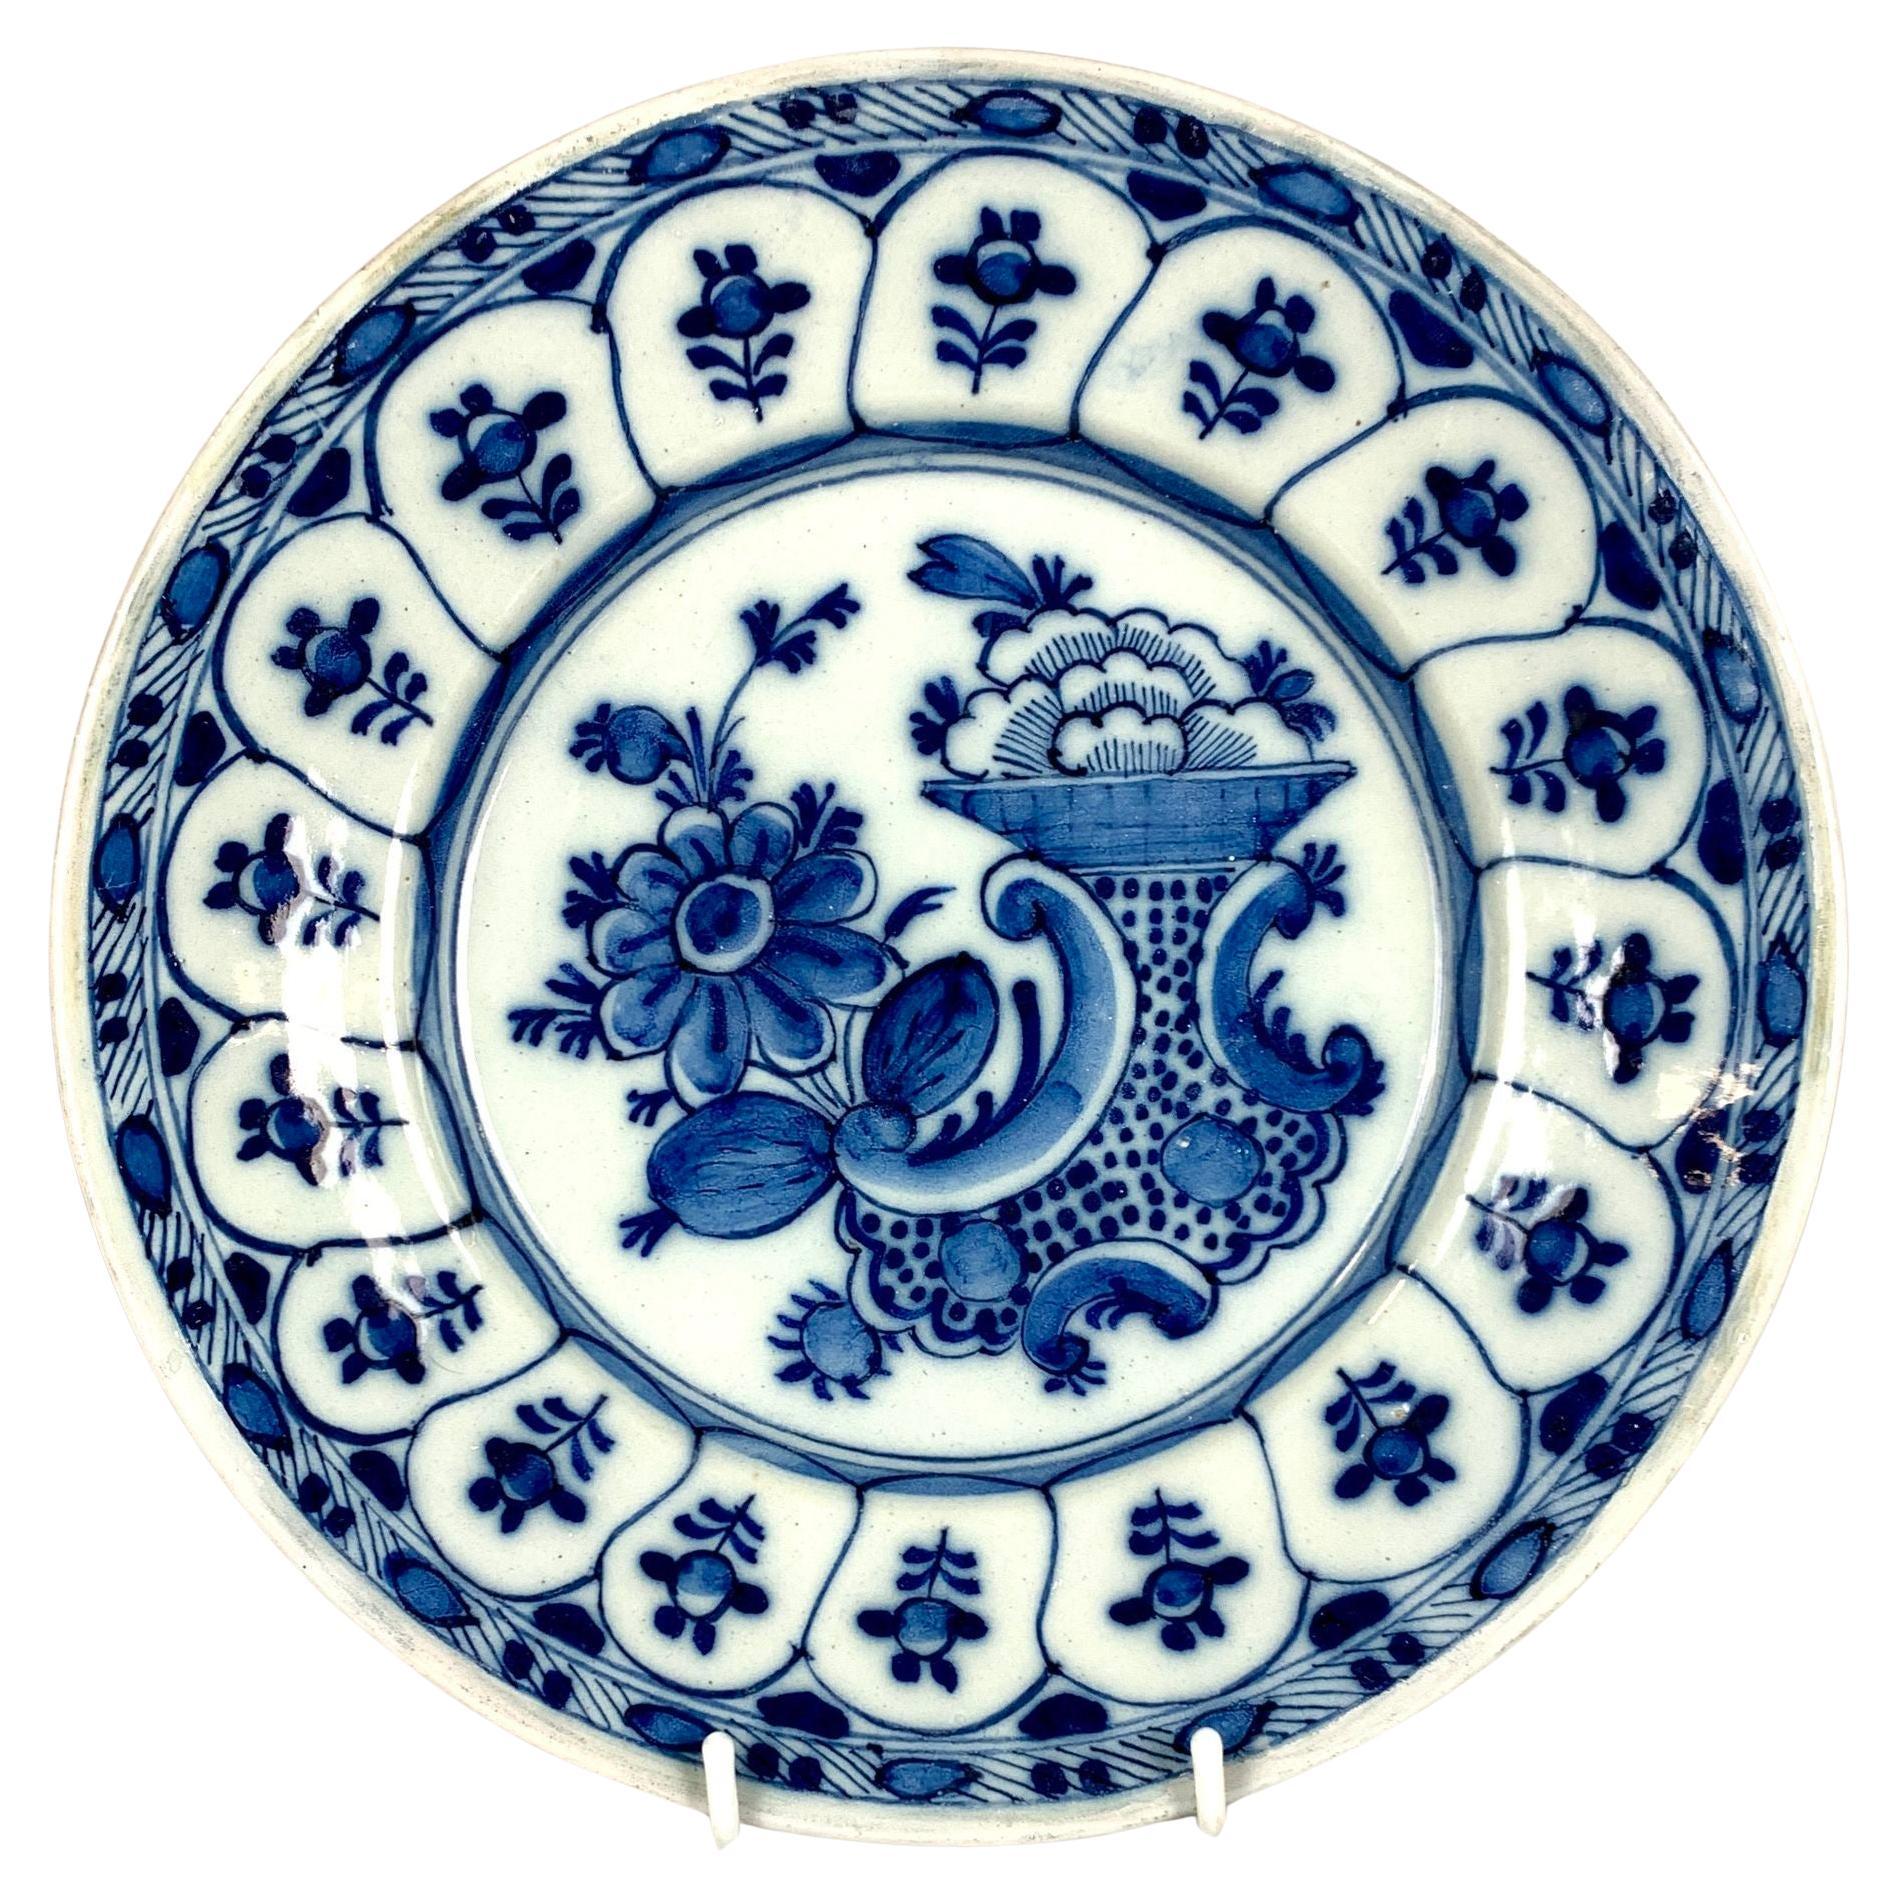 Blue and White Dutch Delft Plate or Dish Netherlands Circa 1780